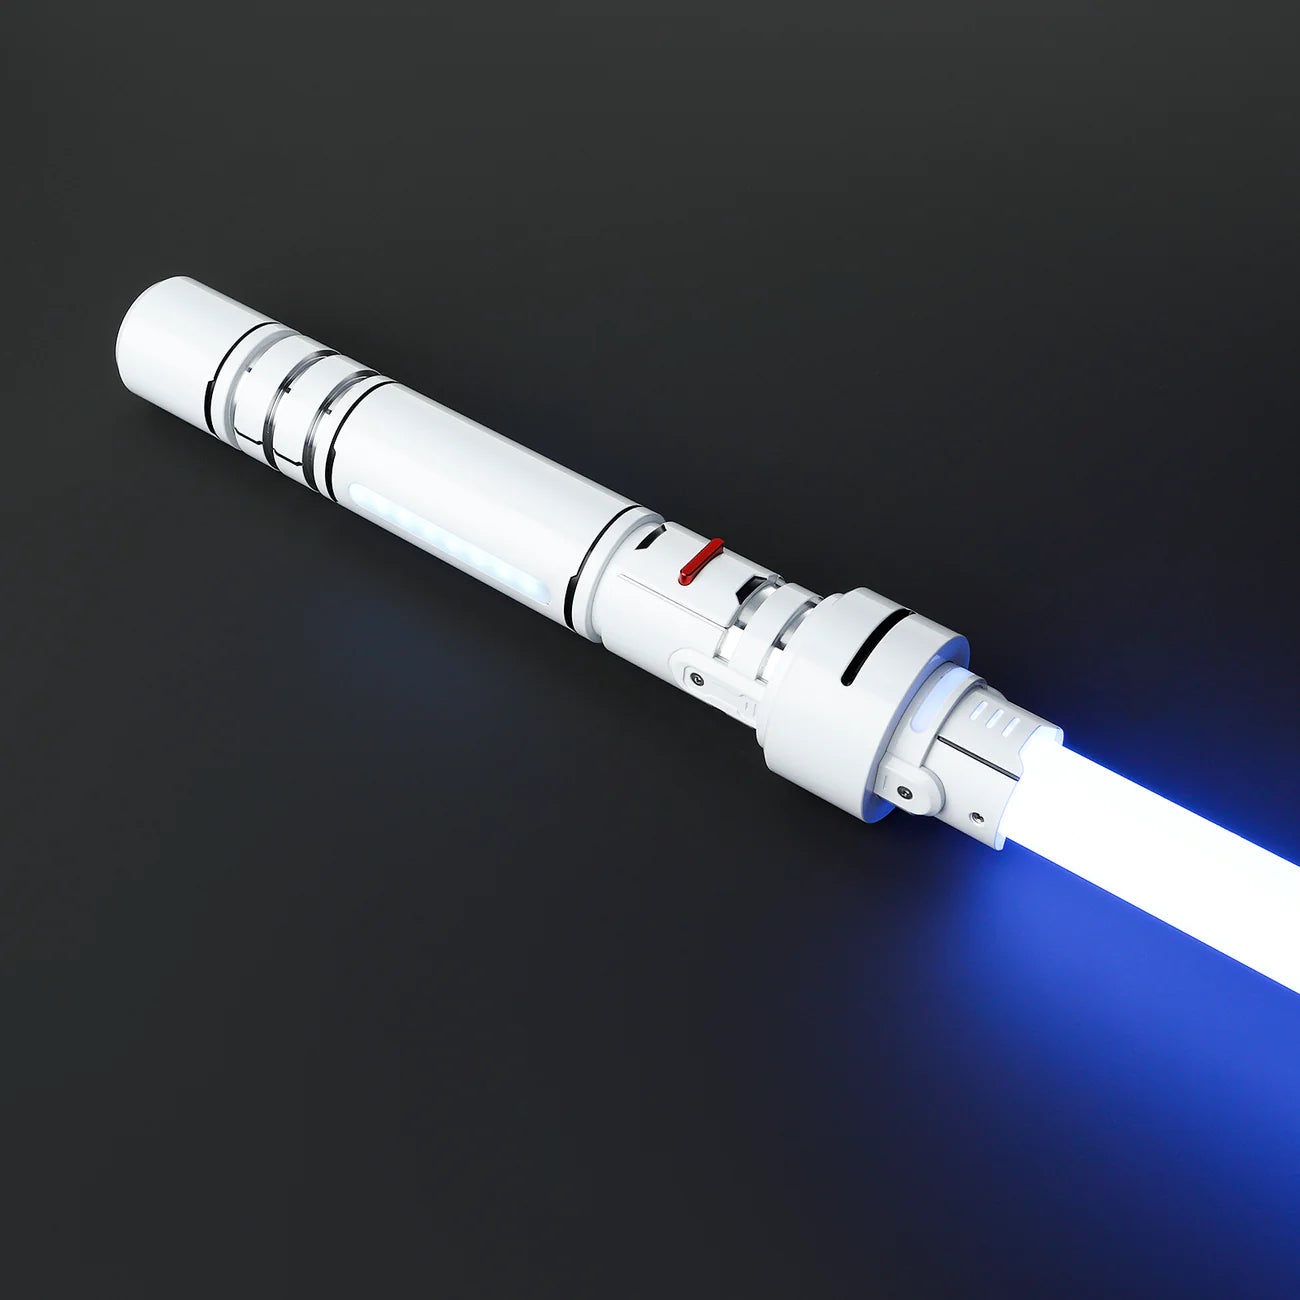 THE TROOPER TRIAD LIGHTSABER